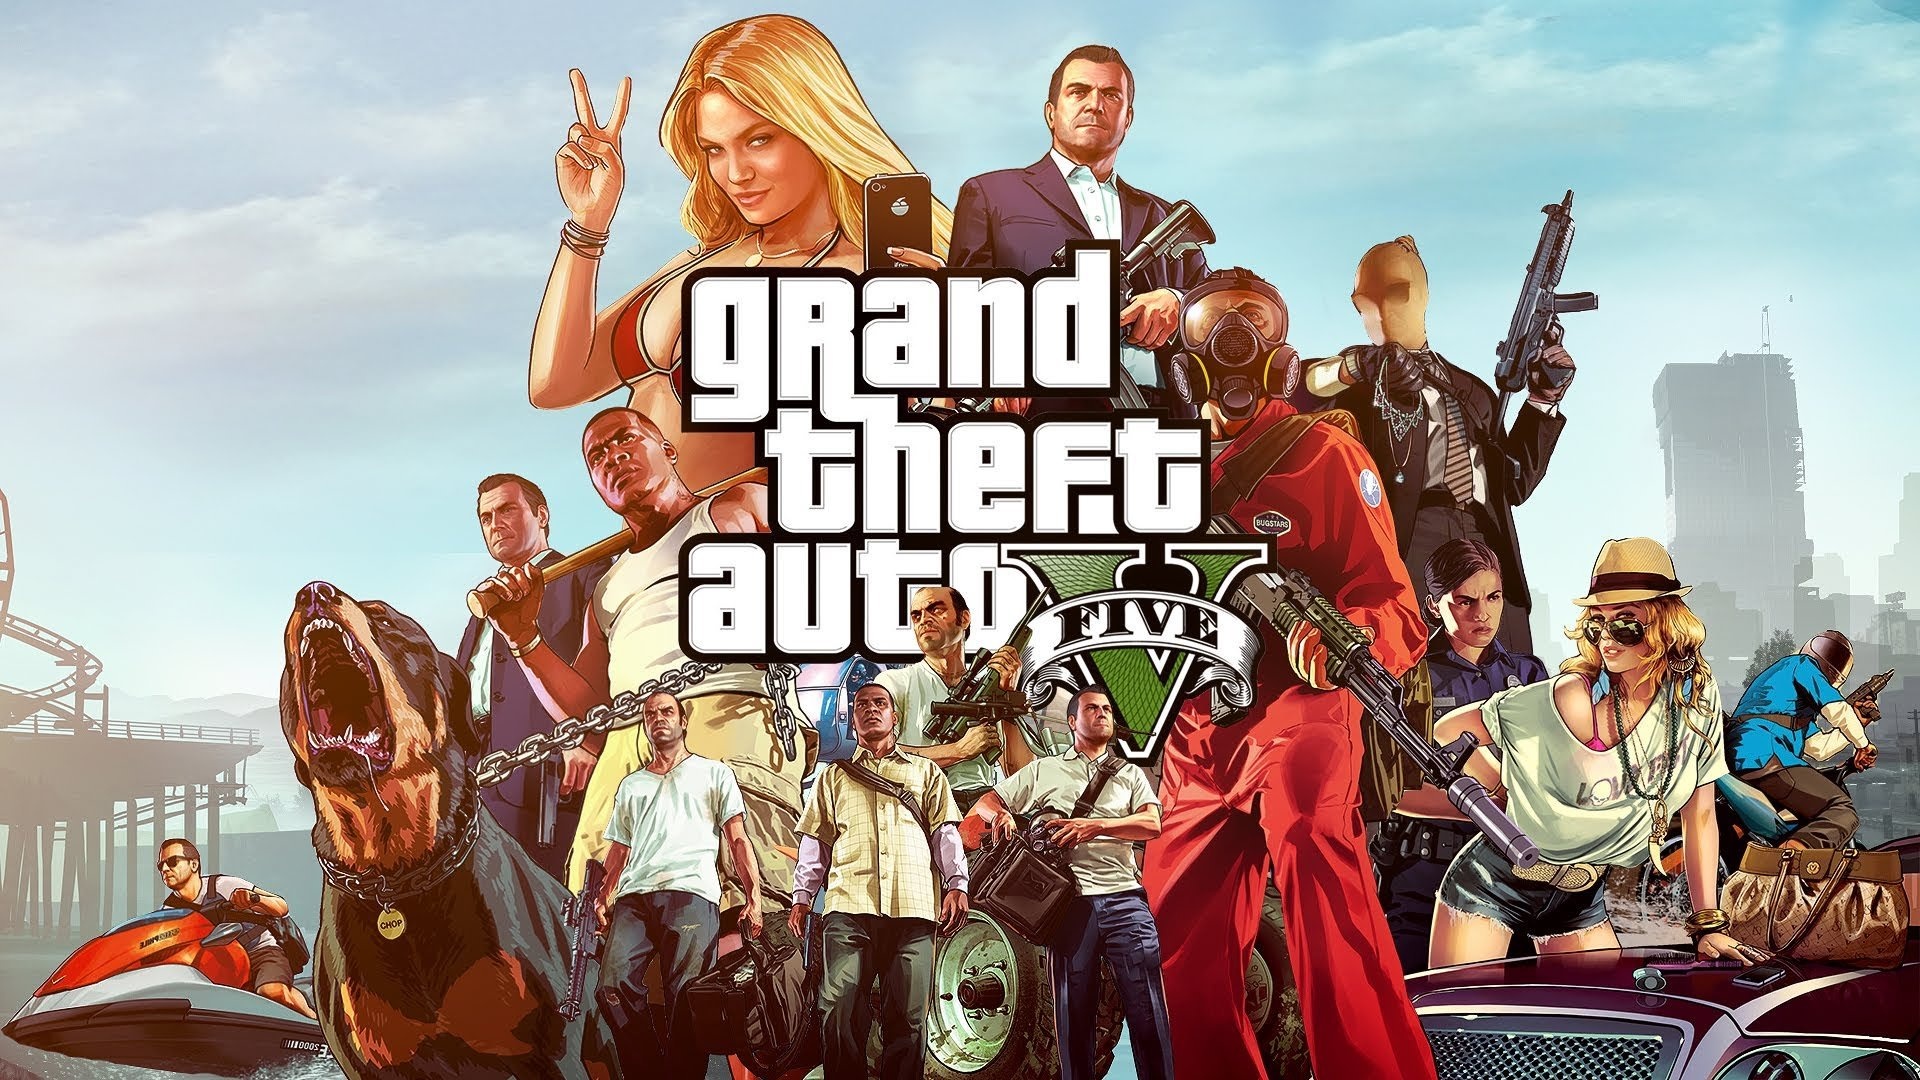 Grand Theft Auto, Intense car chases, Dangerous missions, Urban chaos, 1920x1080 Full HD Desktop